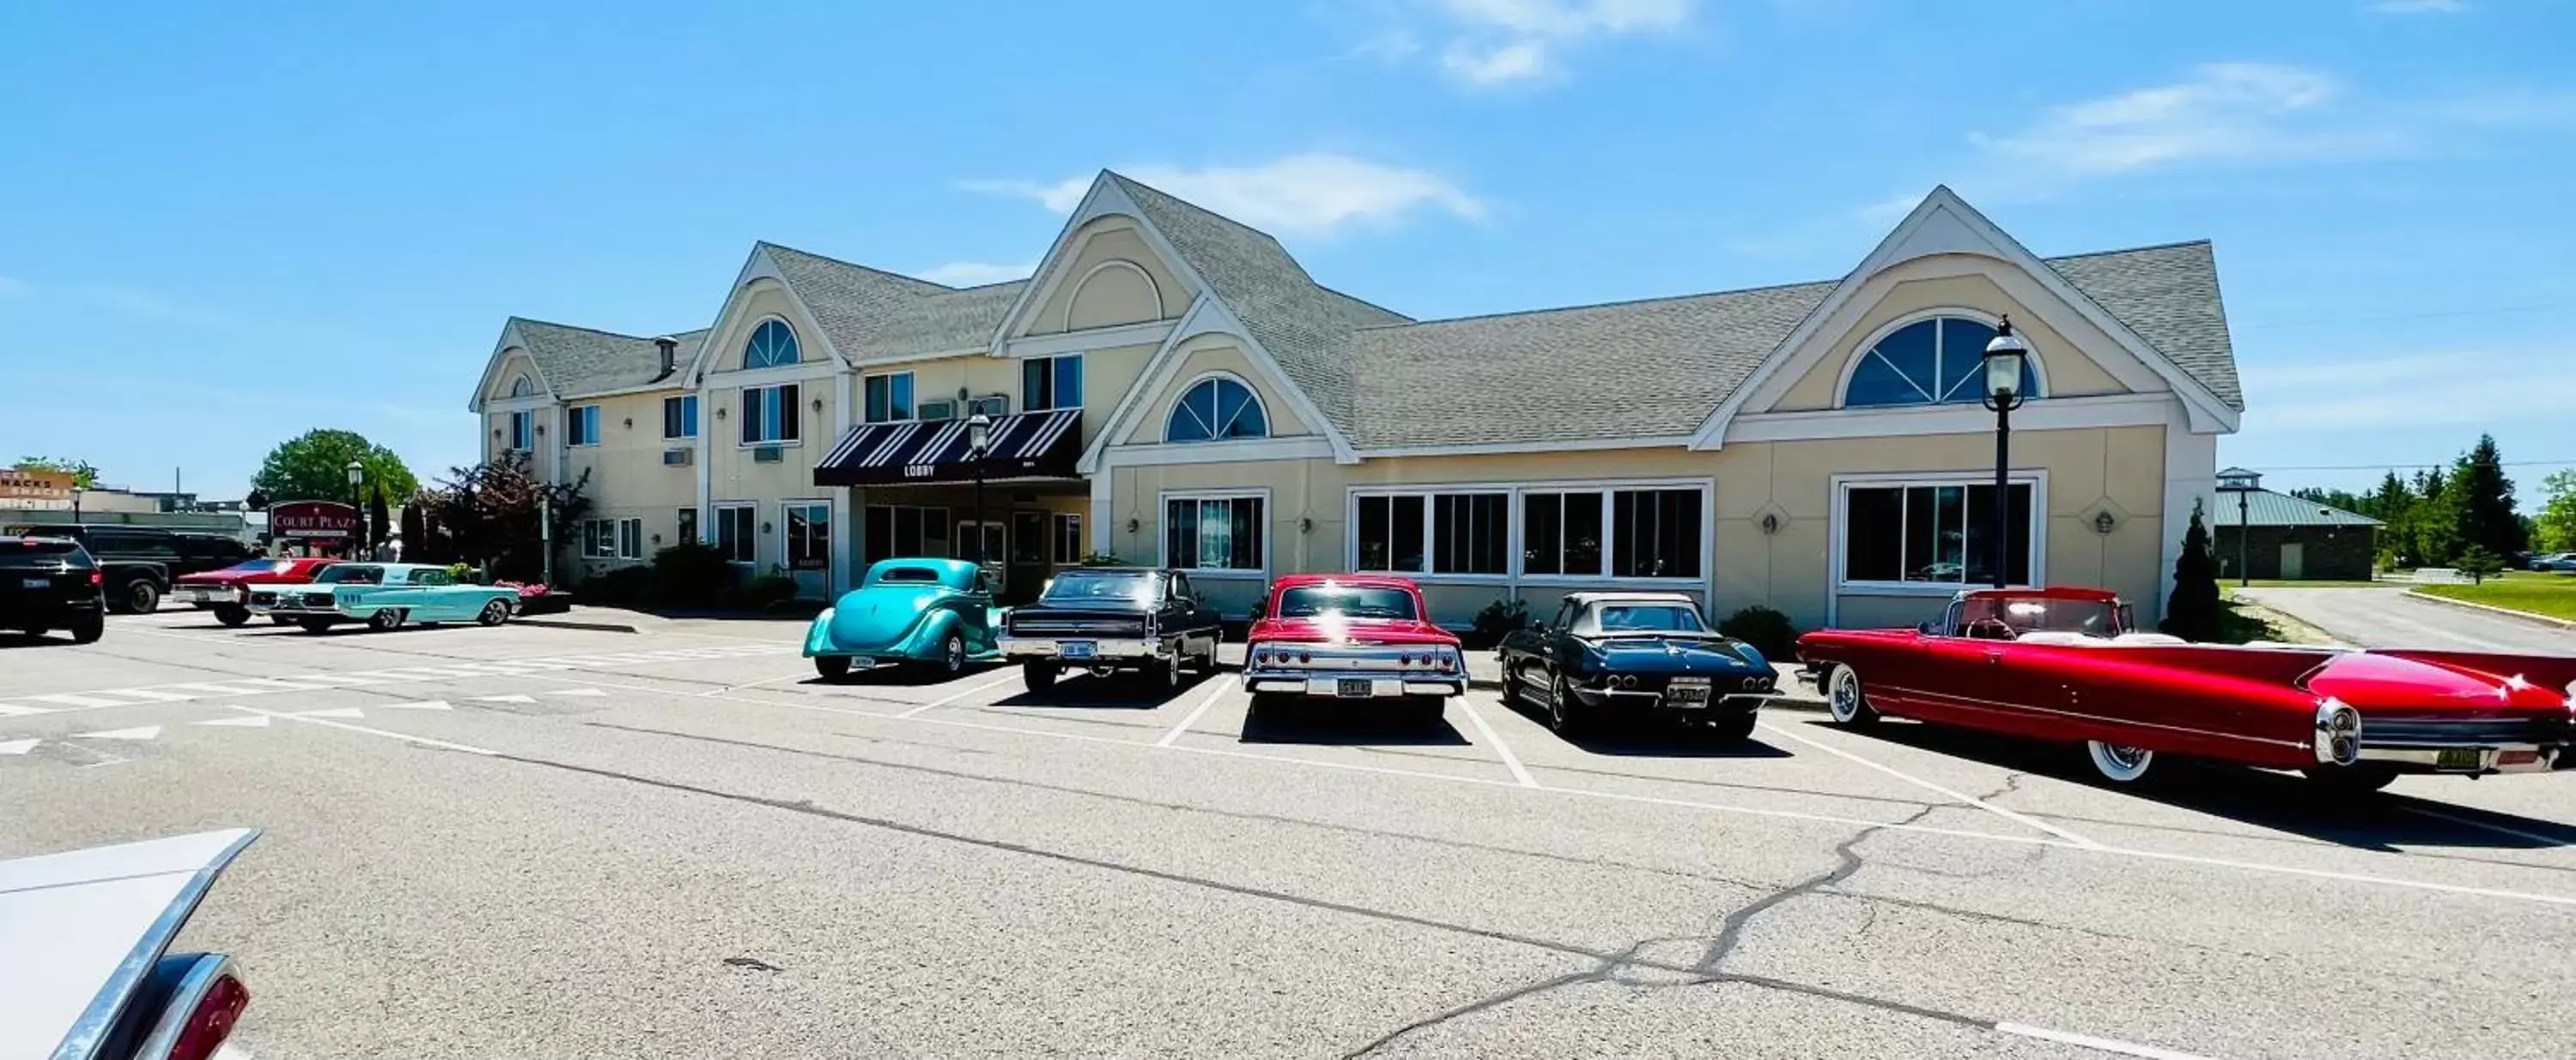 Property Building in Court Plaza Inn & Suites of Mackinaw